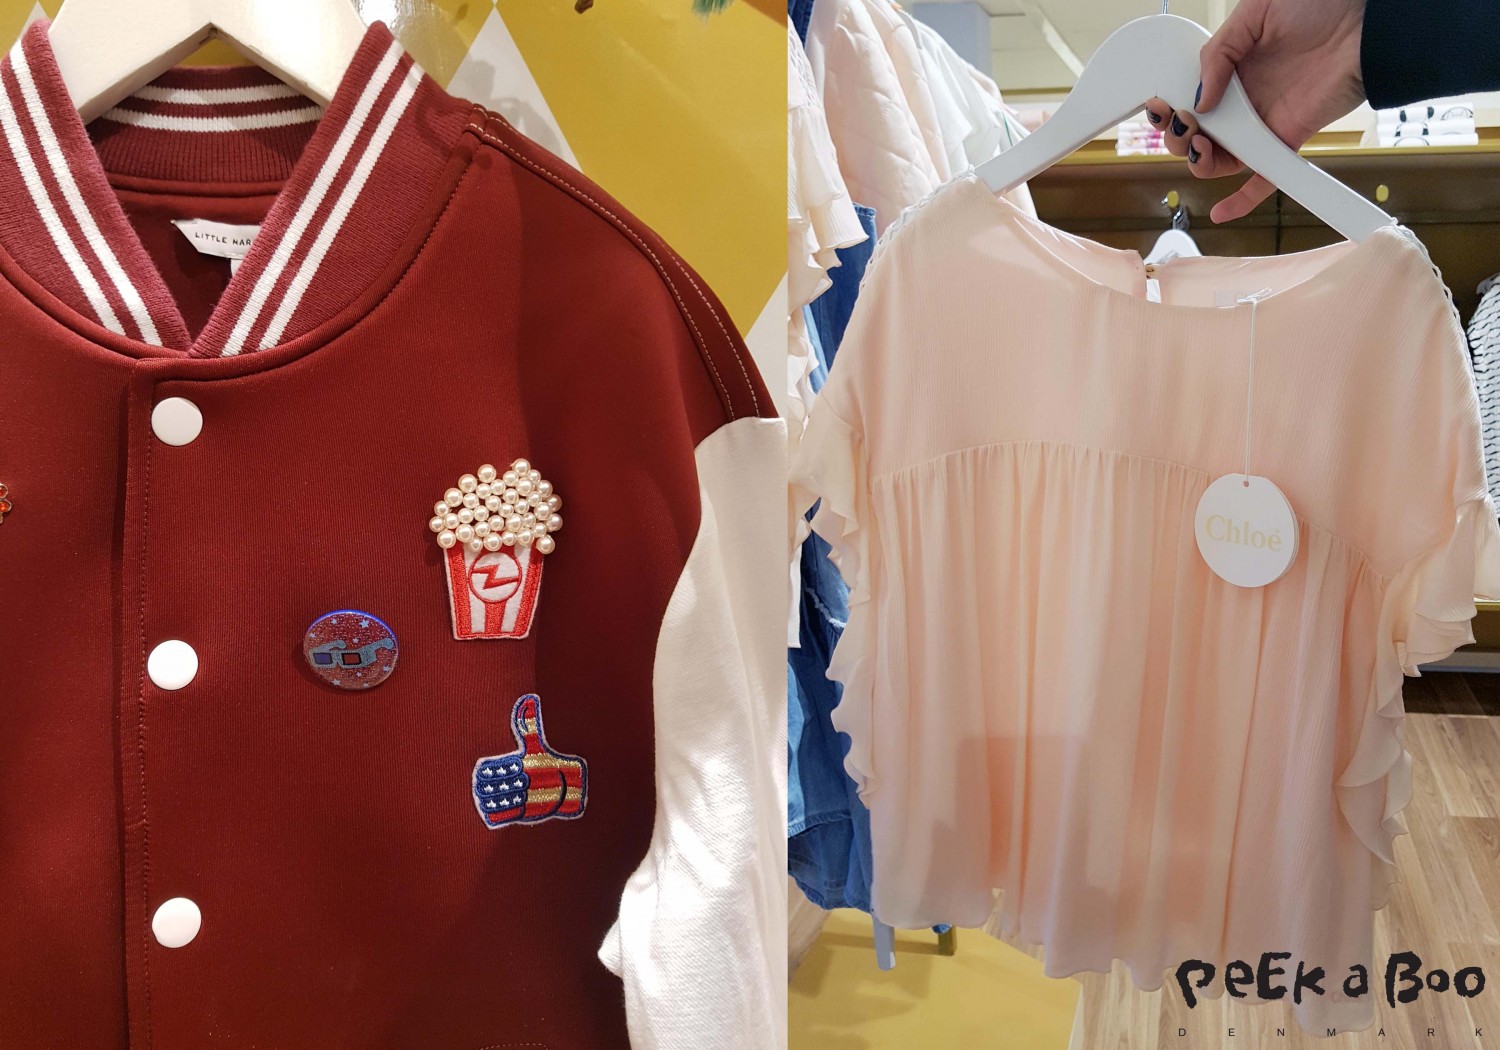 Two other favorits were the feminine top from Chloé and a college jacket from Little Marc with cool badges.